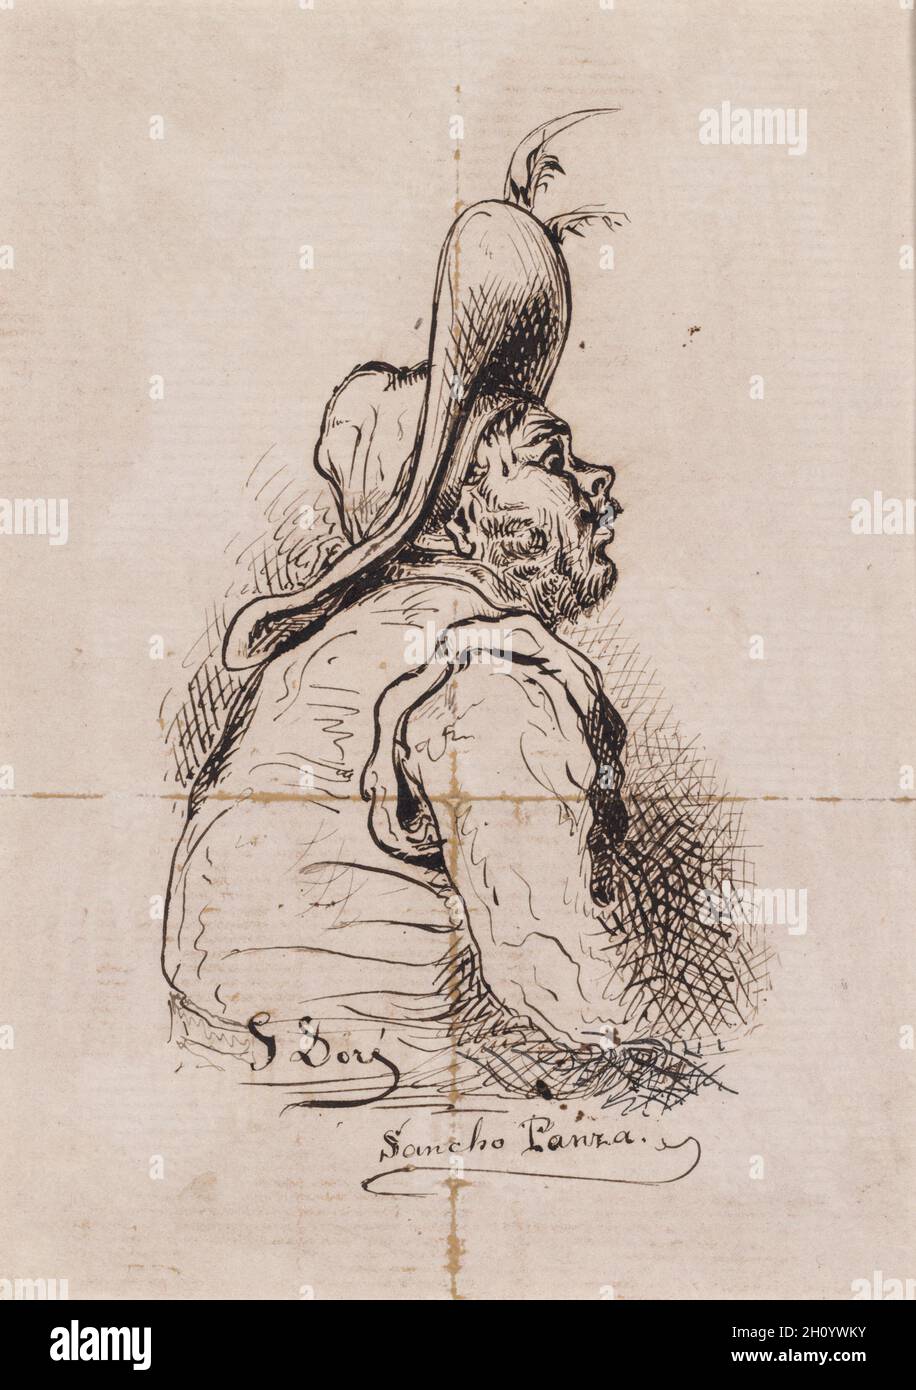 Sancho Panza, c. 1863. Gustave Doré (French, 1832-1883). Pen, brown ink, black ink on modern laid paper; sheet: 14.4 x 10.5 cm (5 11/16 x 4 1/8 in.).  This image is one of a large group of illustrations that French artist Gustave Doré made for an 1863 edition of Miguel de Cervantes’s novel Don Quixote, originally published in 1605. It depicts Sancho Panza, the humorous sidekick of the novel’s hero. Placed at the end of a chapter in the book, this vignette emphasizes Sancho’s stocky form and curiosity, as he looks forward attentively. Stock Photo